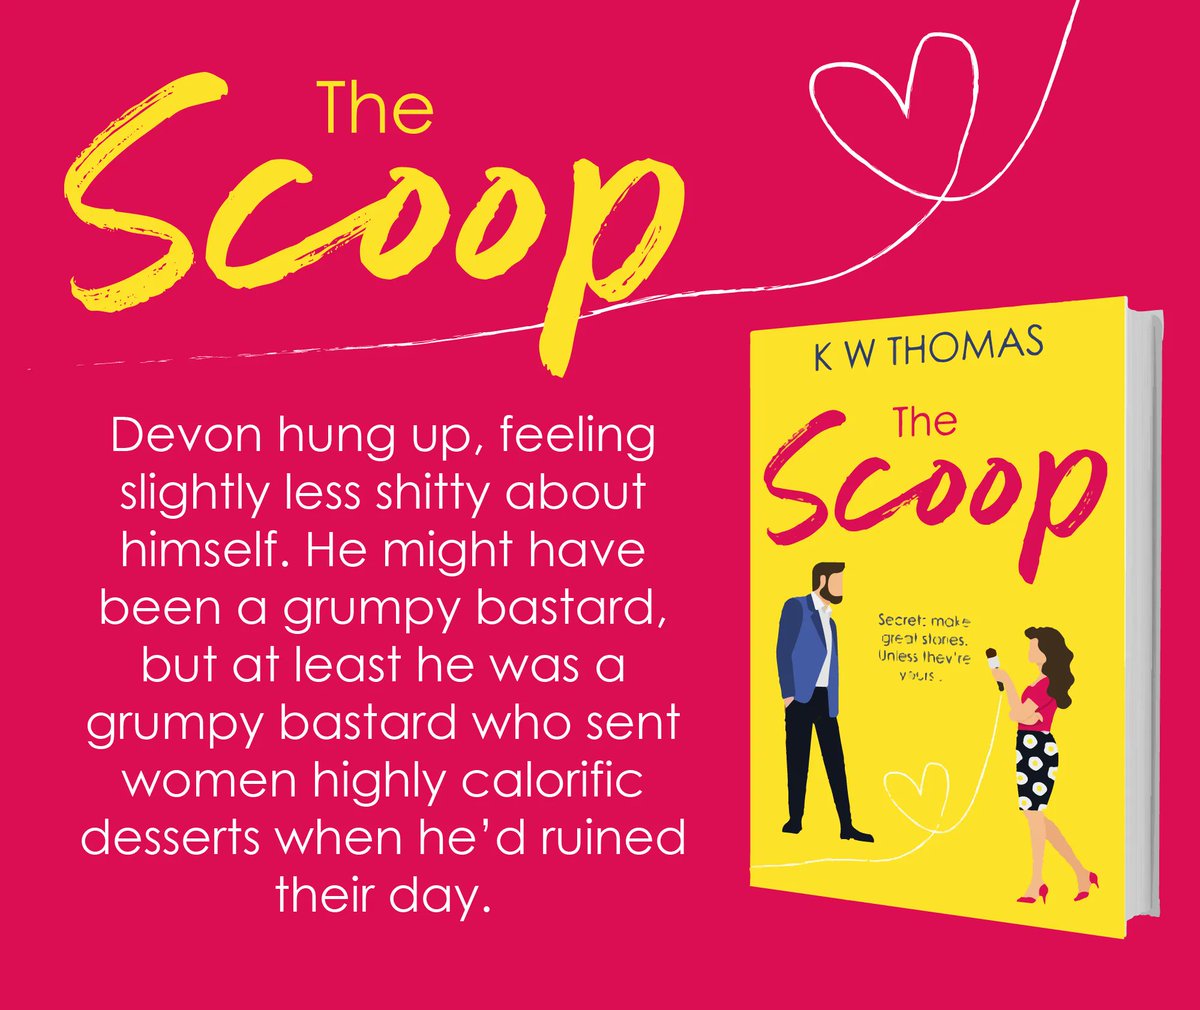 Like celebrity romance with plenty of heat and probably excessive mentions of food? Grab The Scoop for 99p on Kindle! Free in Kindle Unlimited! mybook.to/TheScoop